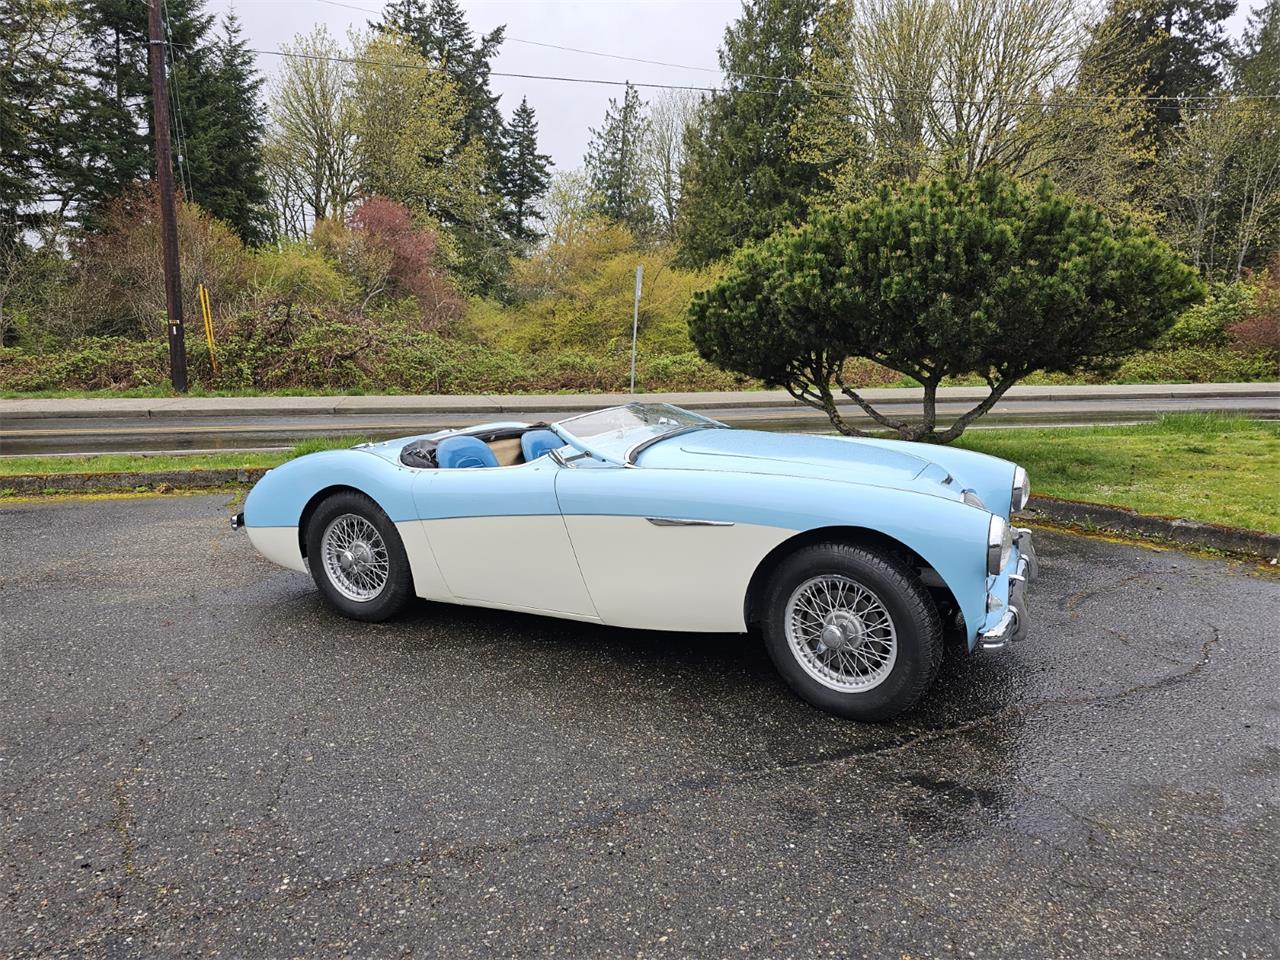 For Sale at Auction: 1956 Austin 1100 in Tacoma, Washington